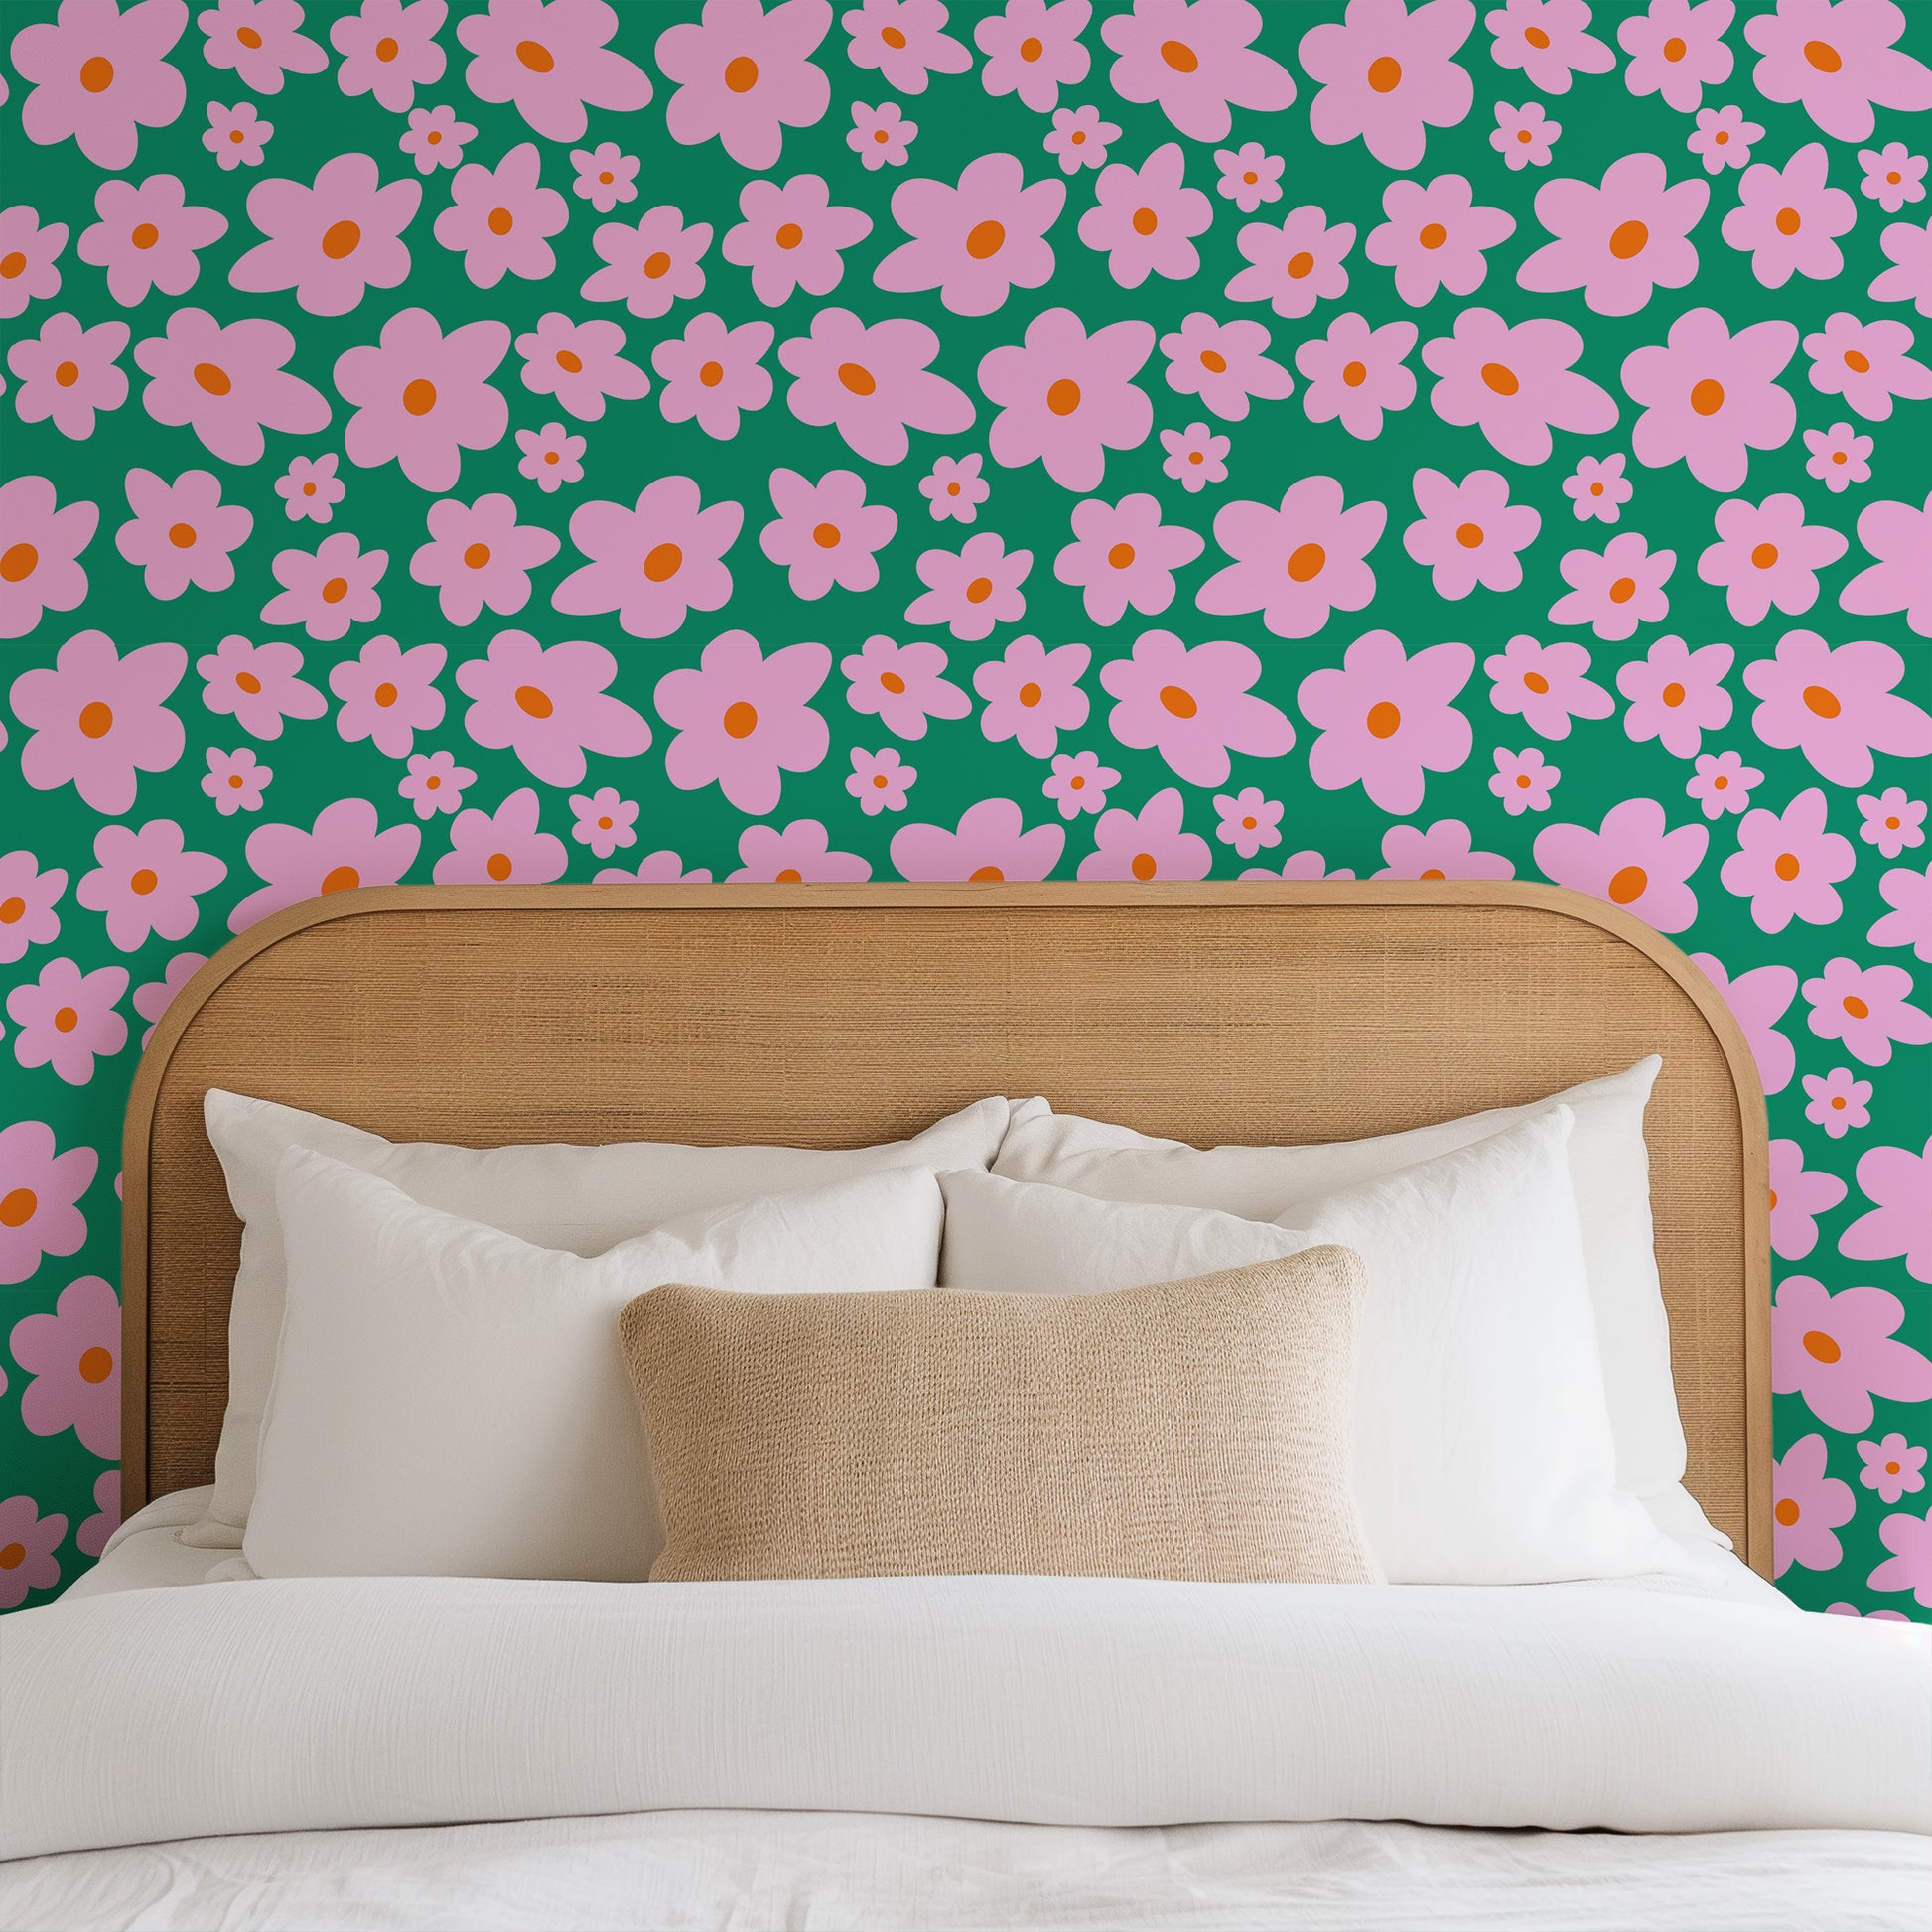 Daisy floral wallpaper in green and pink colours for bedroom, living room, bathroom, uk made